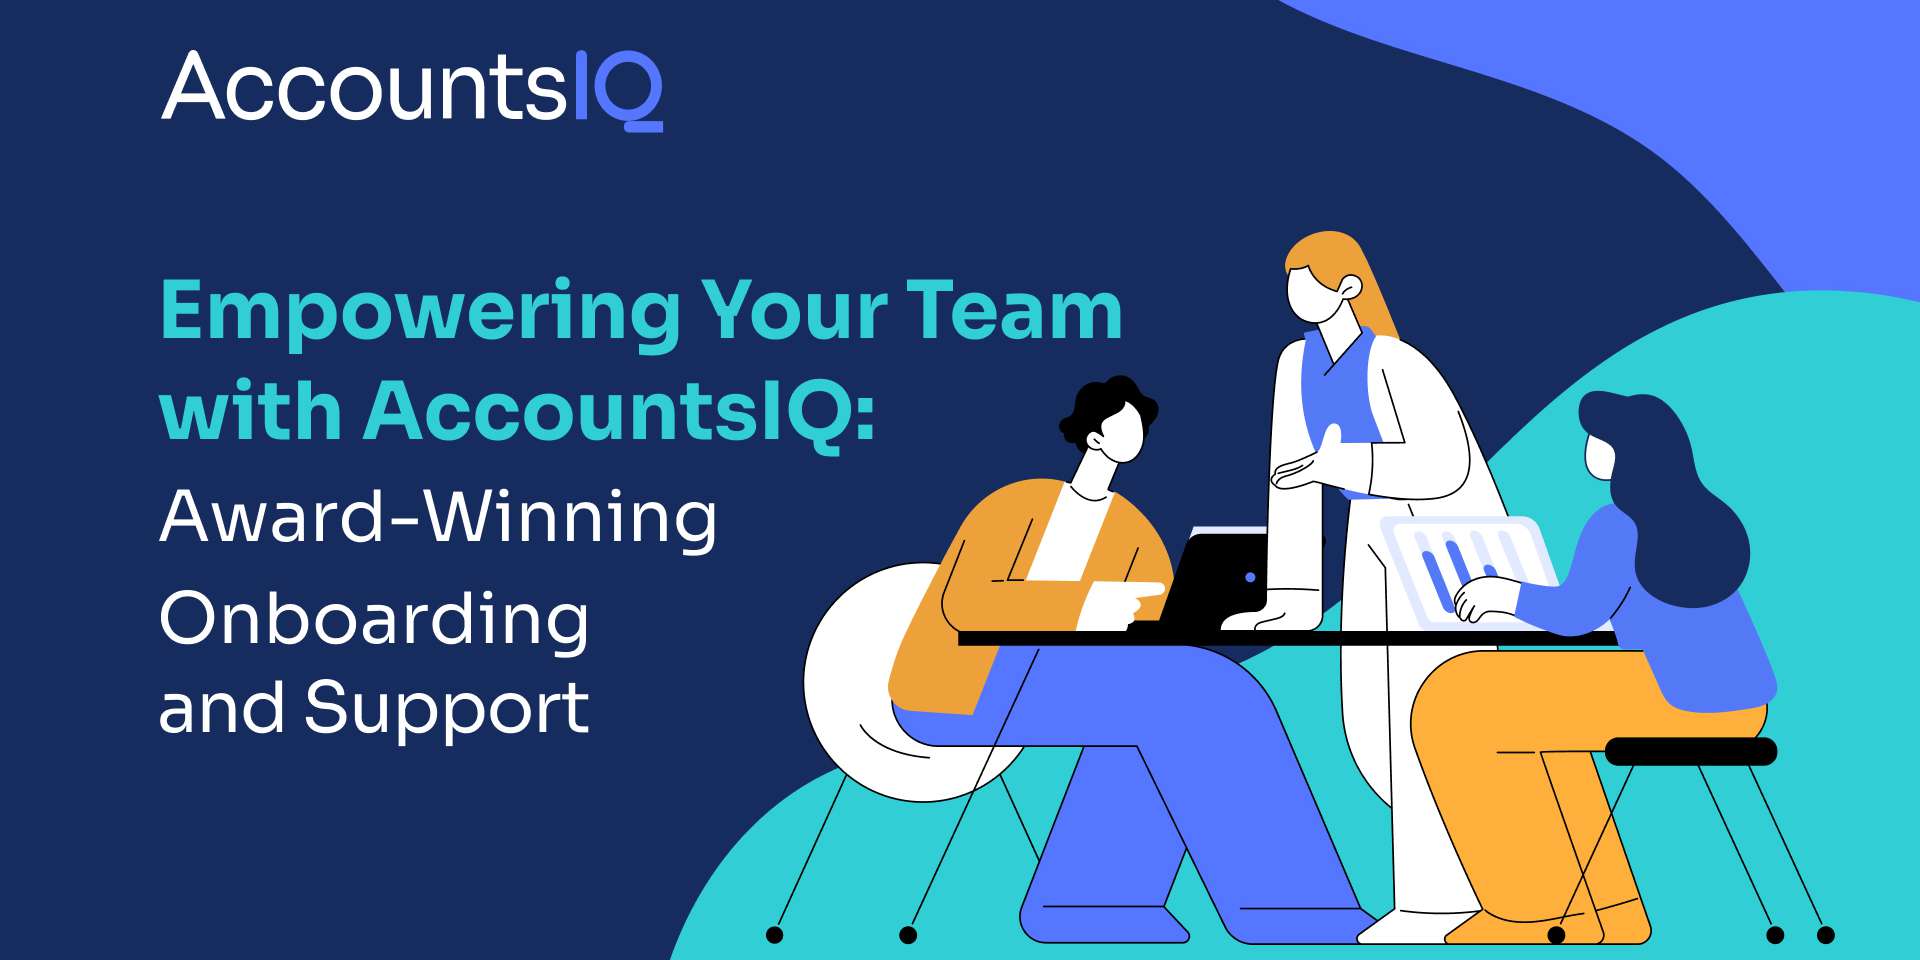 Award-Winning Onboarding and Support